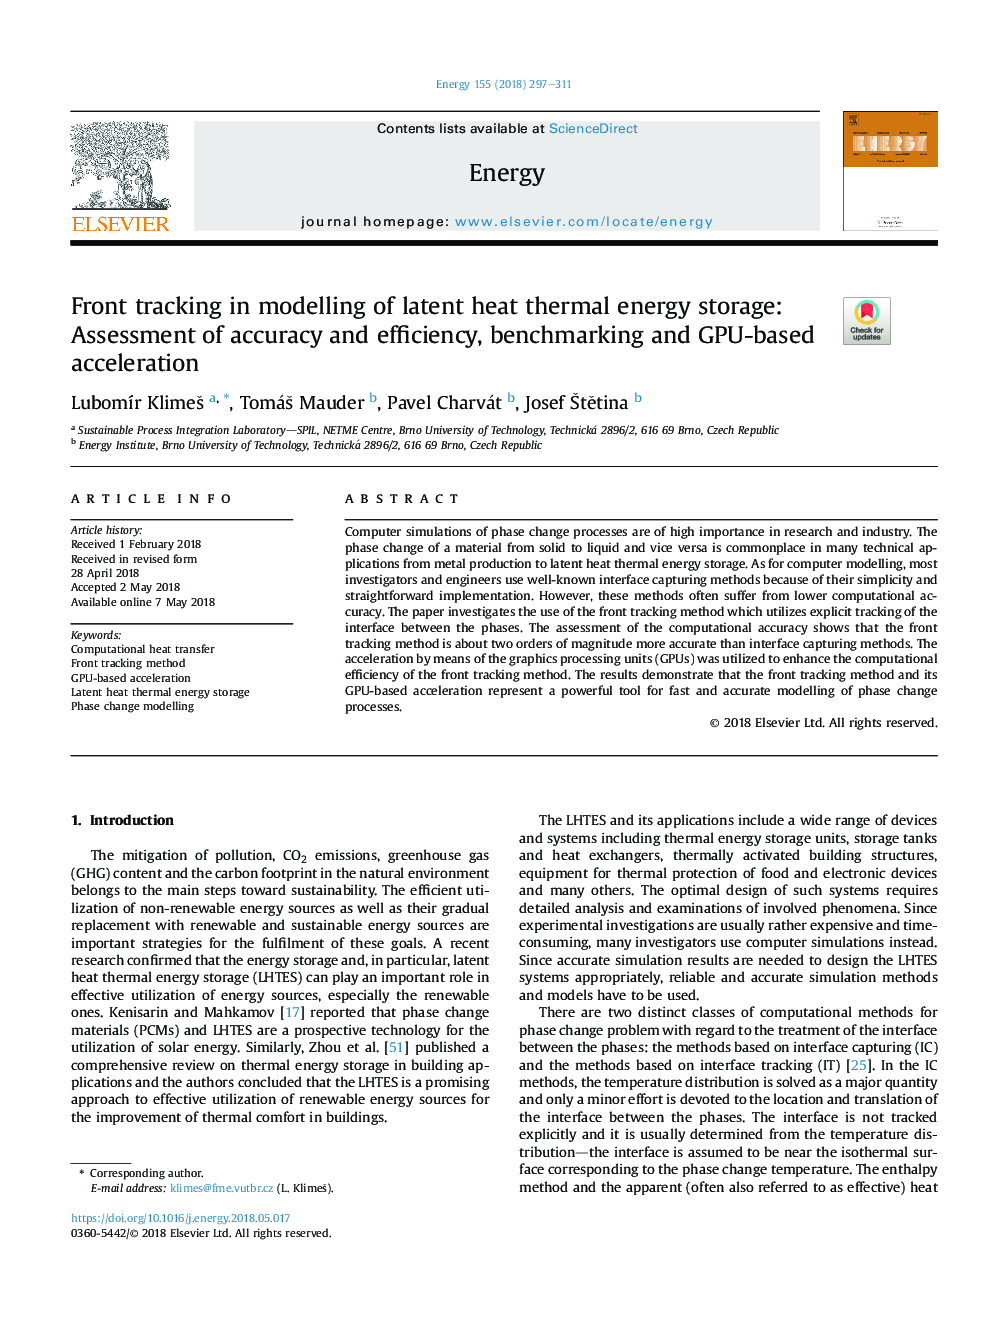 Front tracking in modelling of latent heat thermal energy storage: Assessment of accuracy and efficiency, benchmarking and GPU-based acceleration